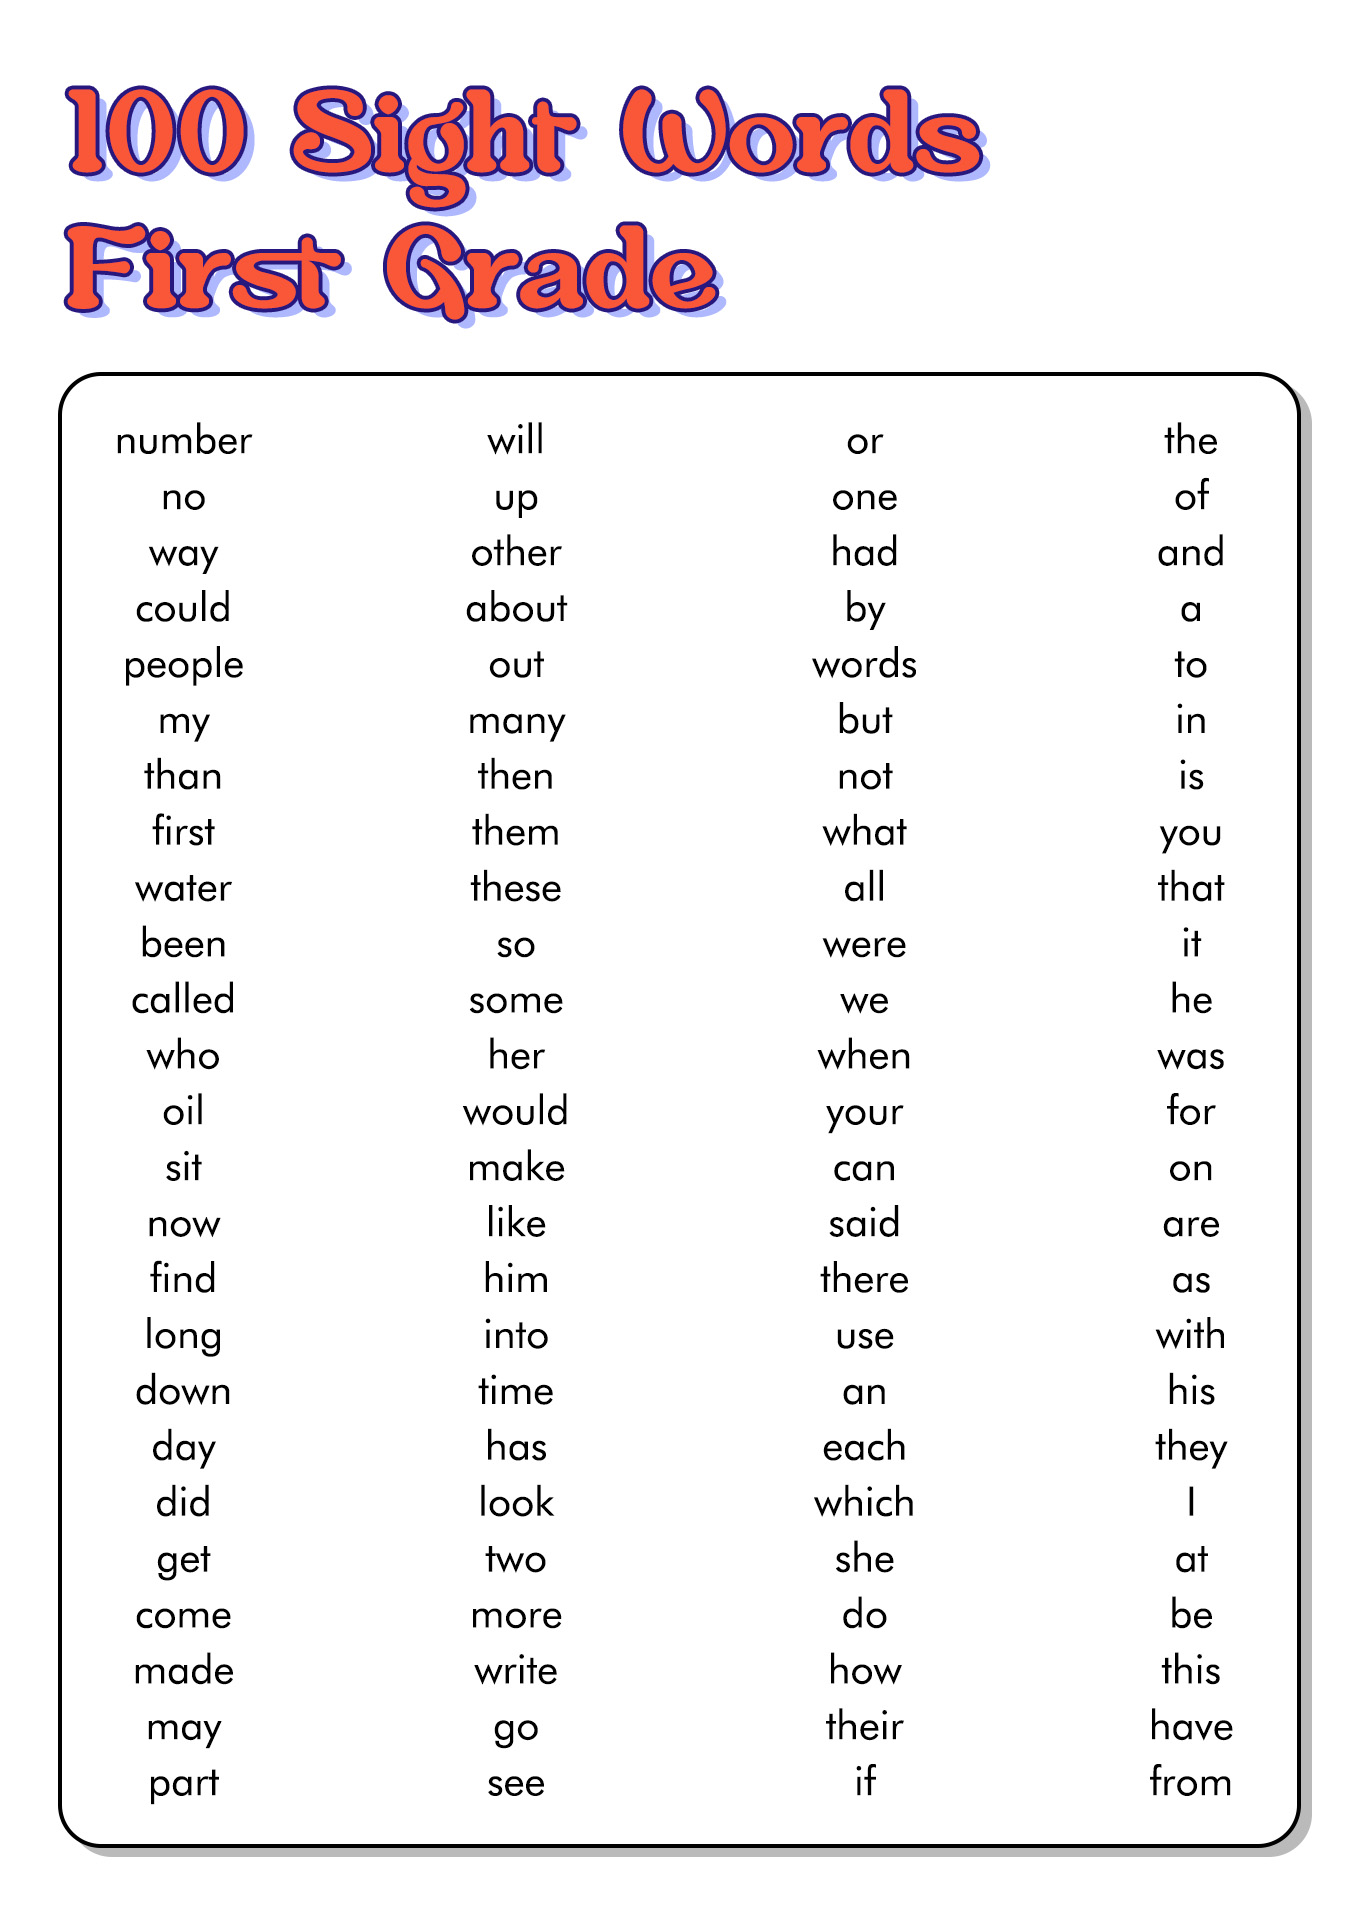 100 Sight Words First Grade Image